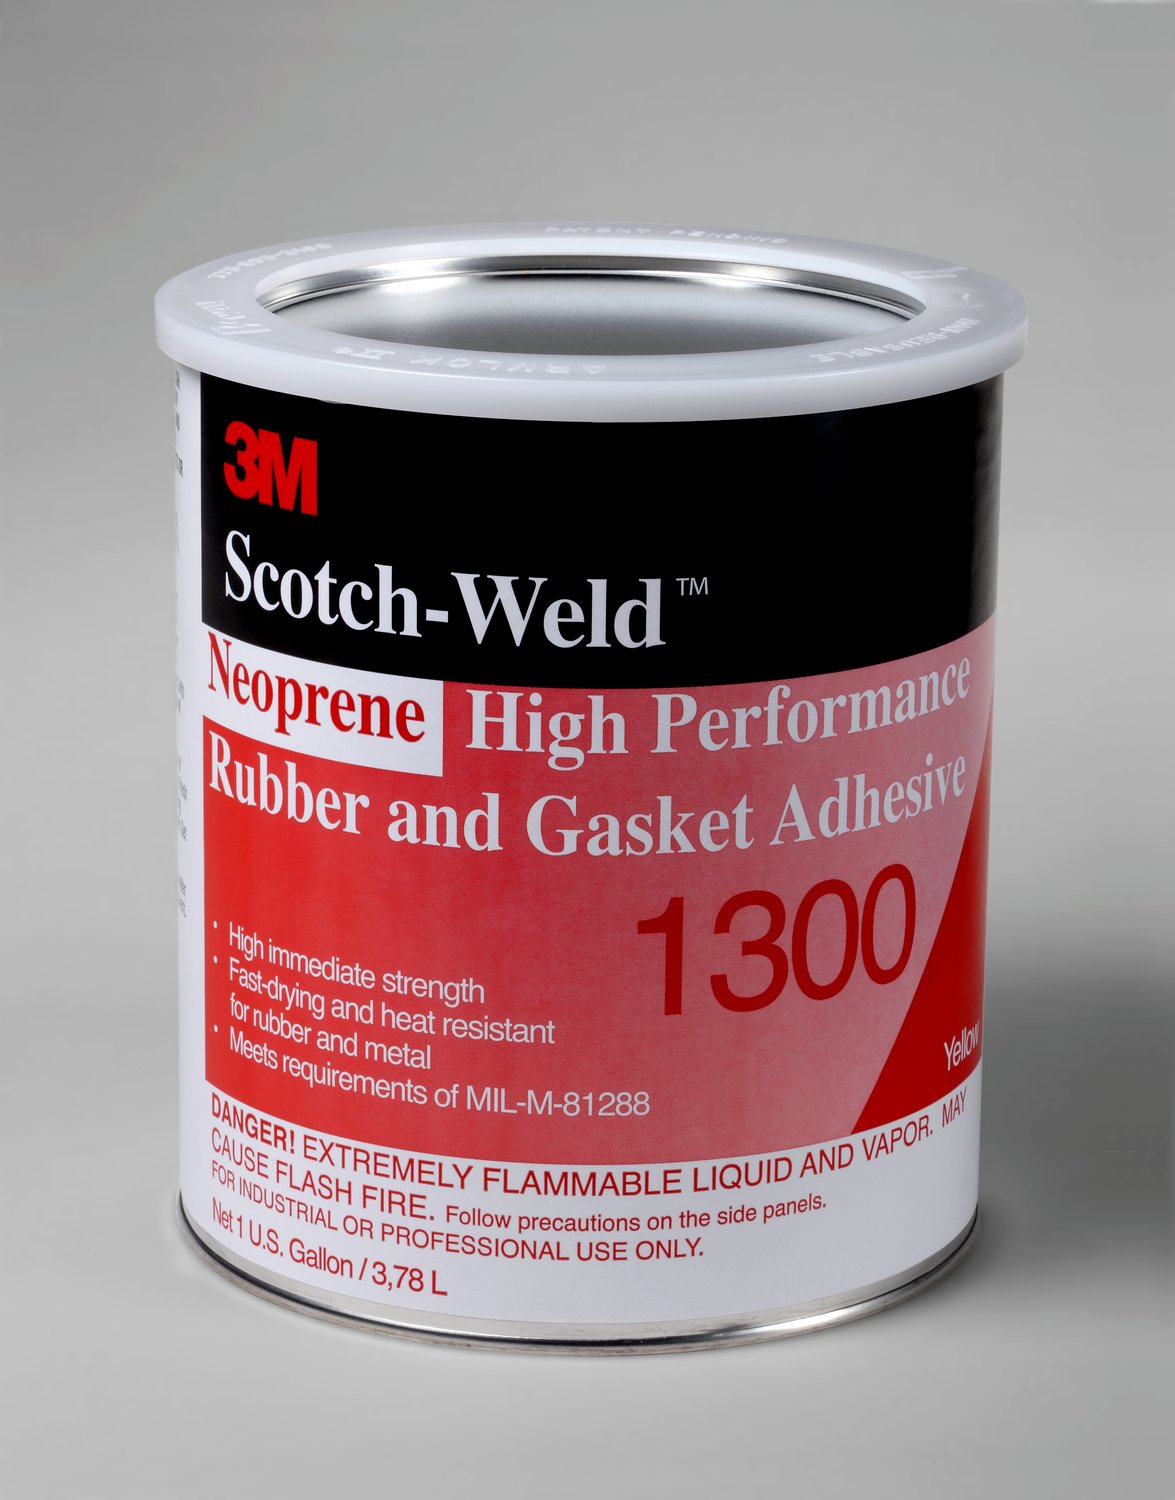 7010292697 - 3M Neoprene High Performance Rubber and Gasket Adhesive 1300, Yellow, 1
Gallon Can, 4/case